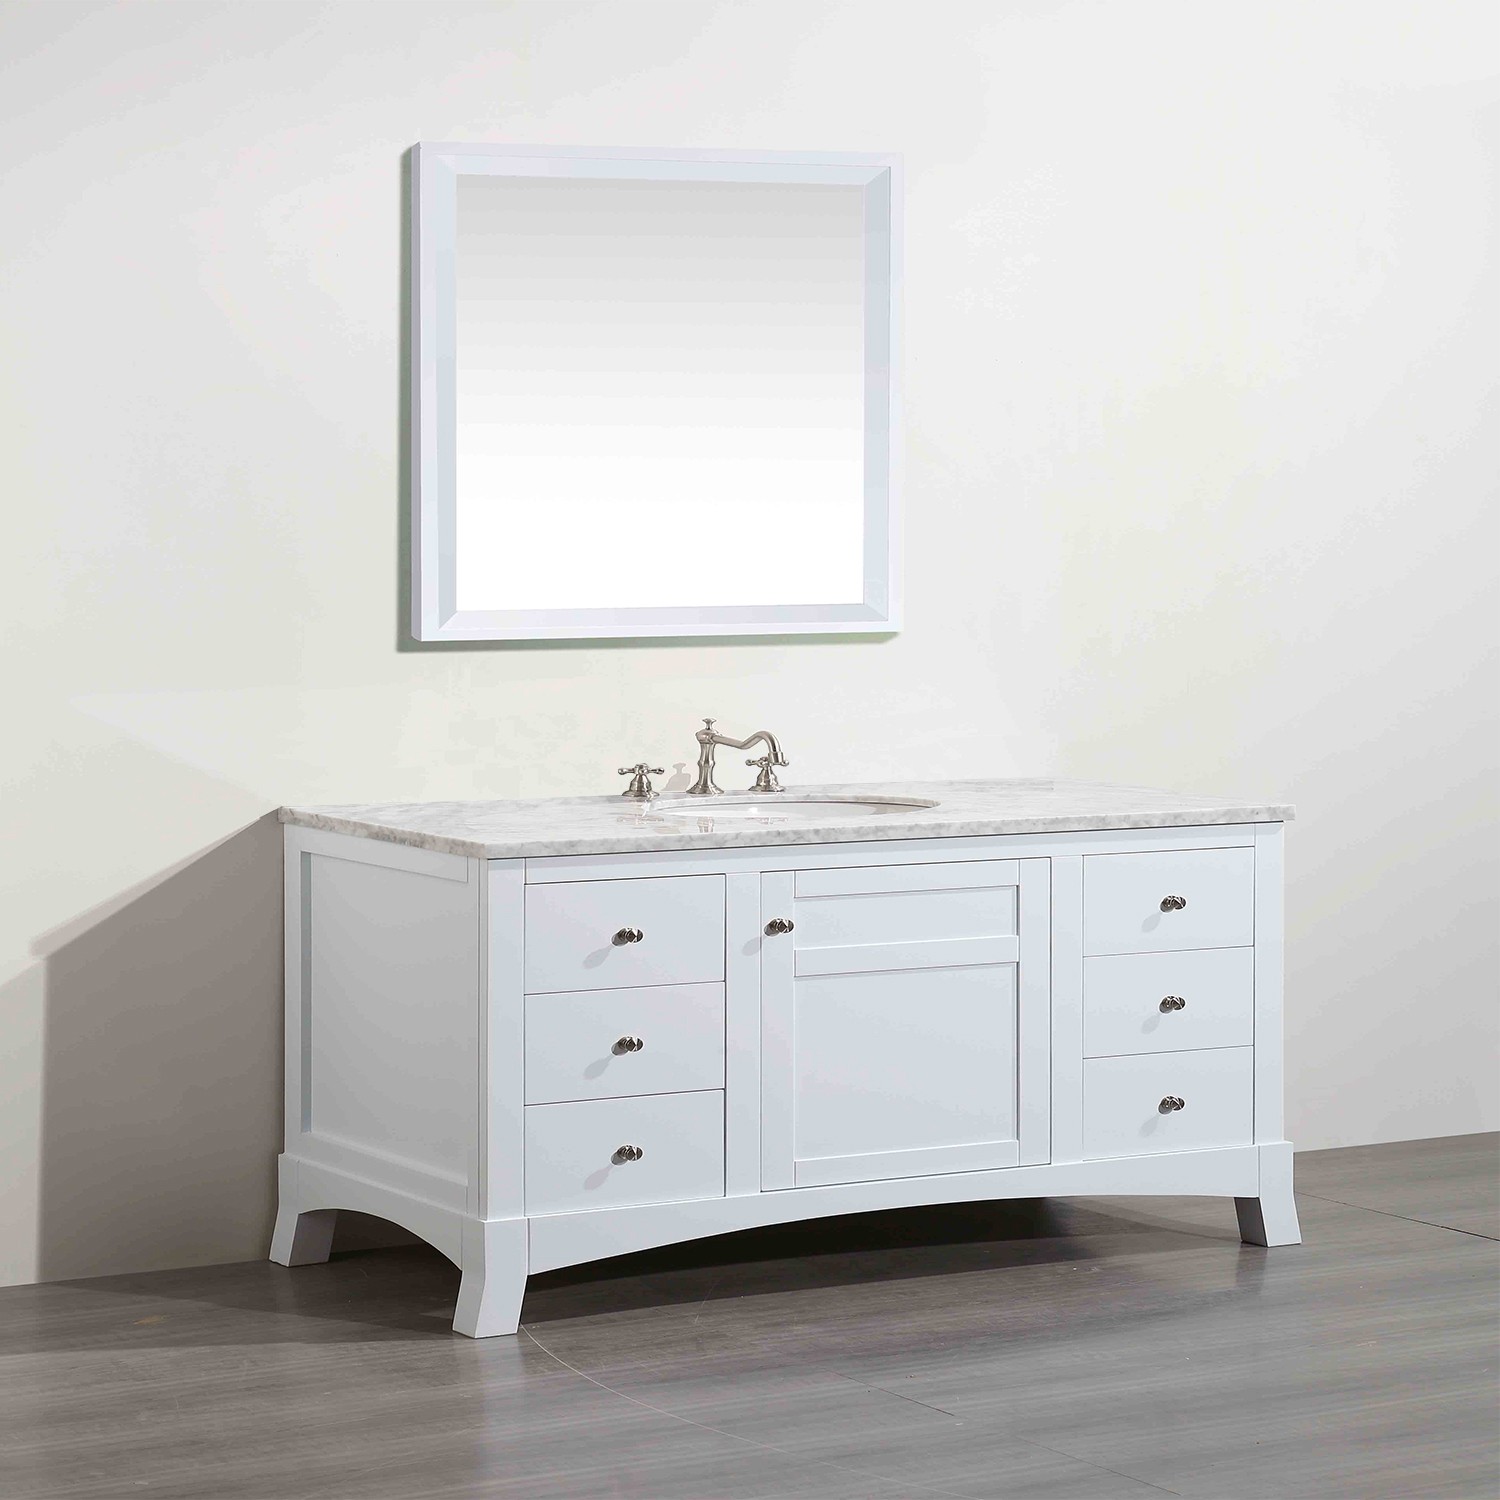 Eviva New York 42 White Bathroom Vanity With White Marble Carrera Counter Top And Sink Decors Us 